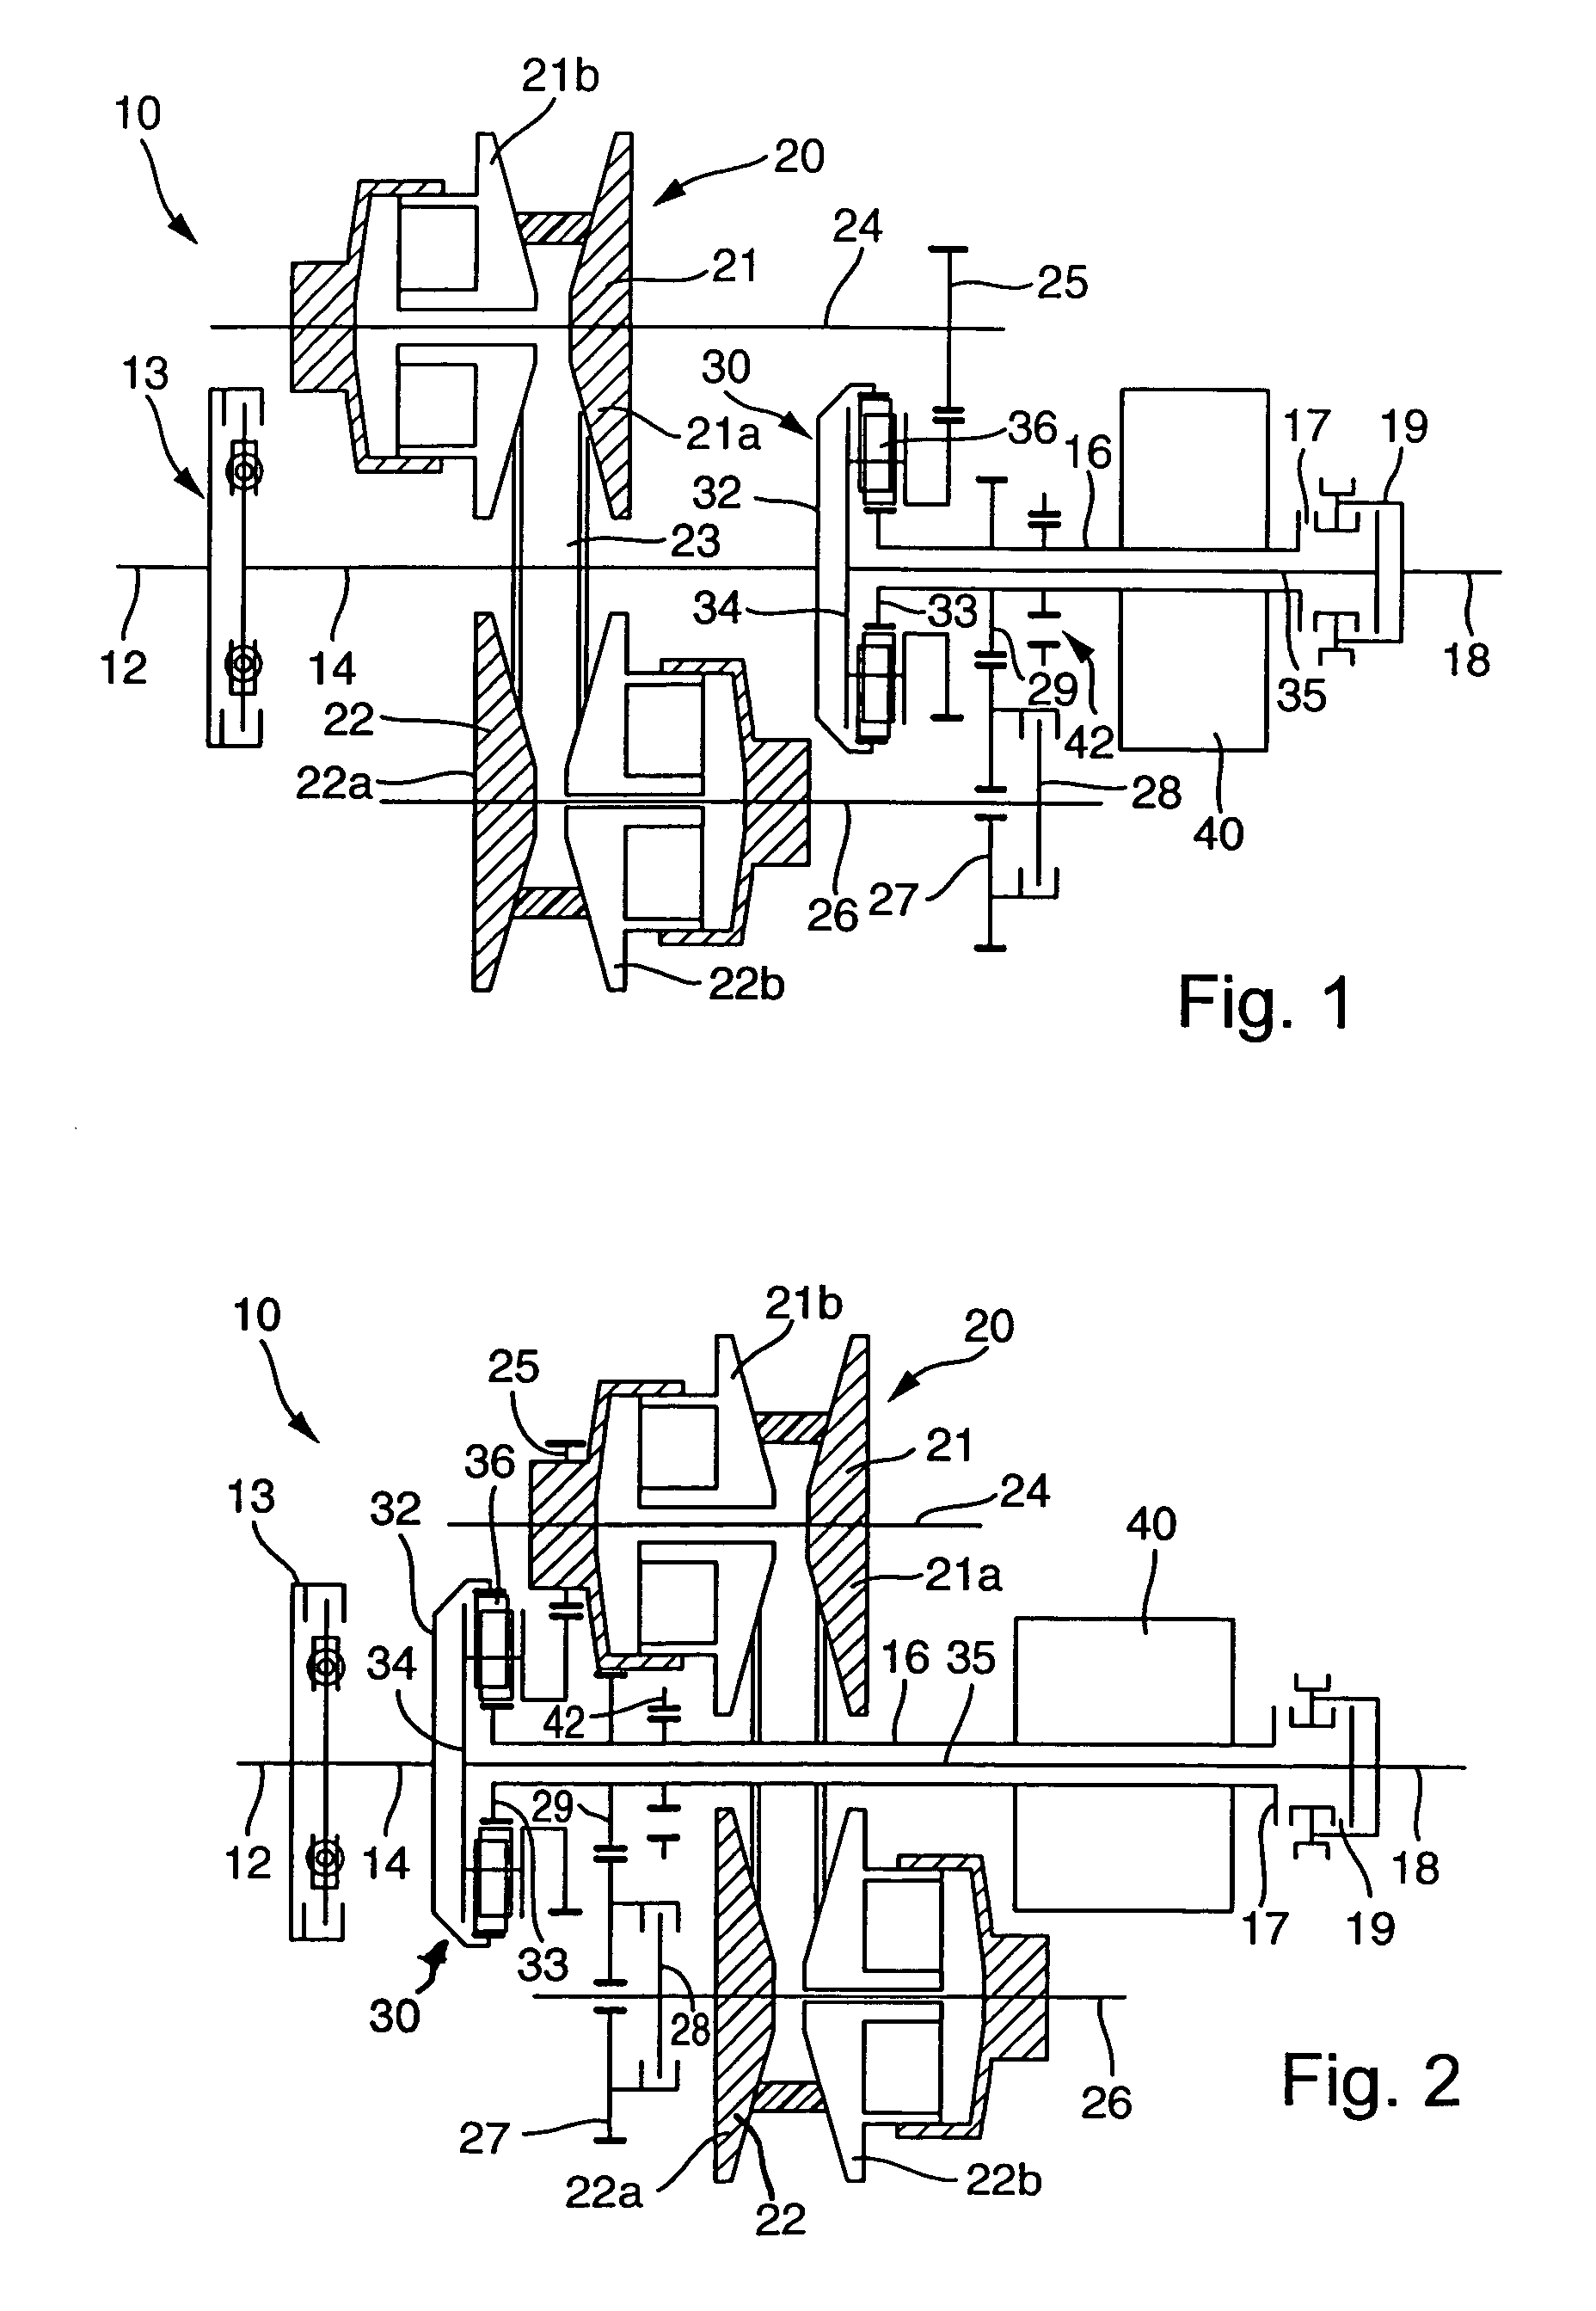 Power-branched transmission having a plurality of transmission ration ranges with continuously variable transmission ratio